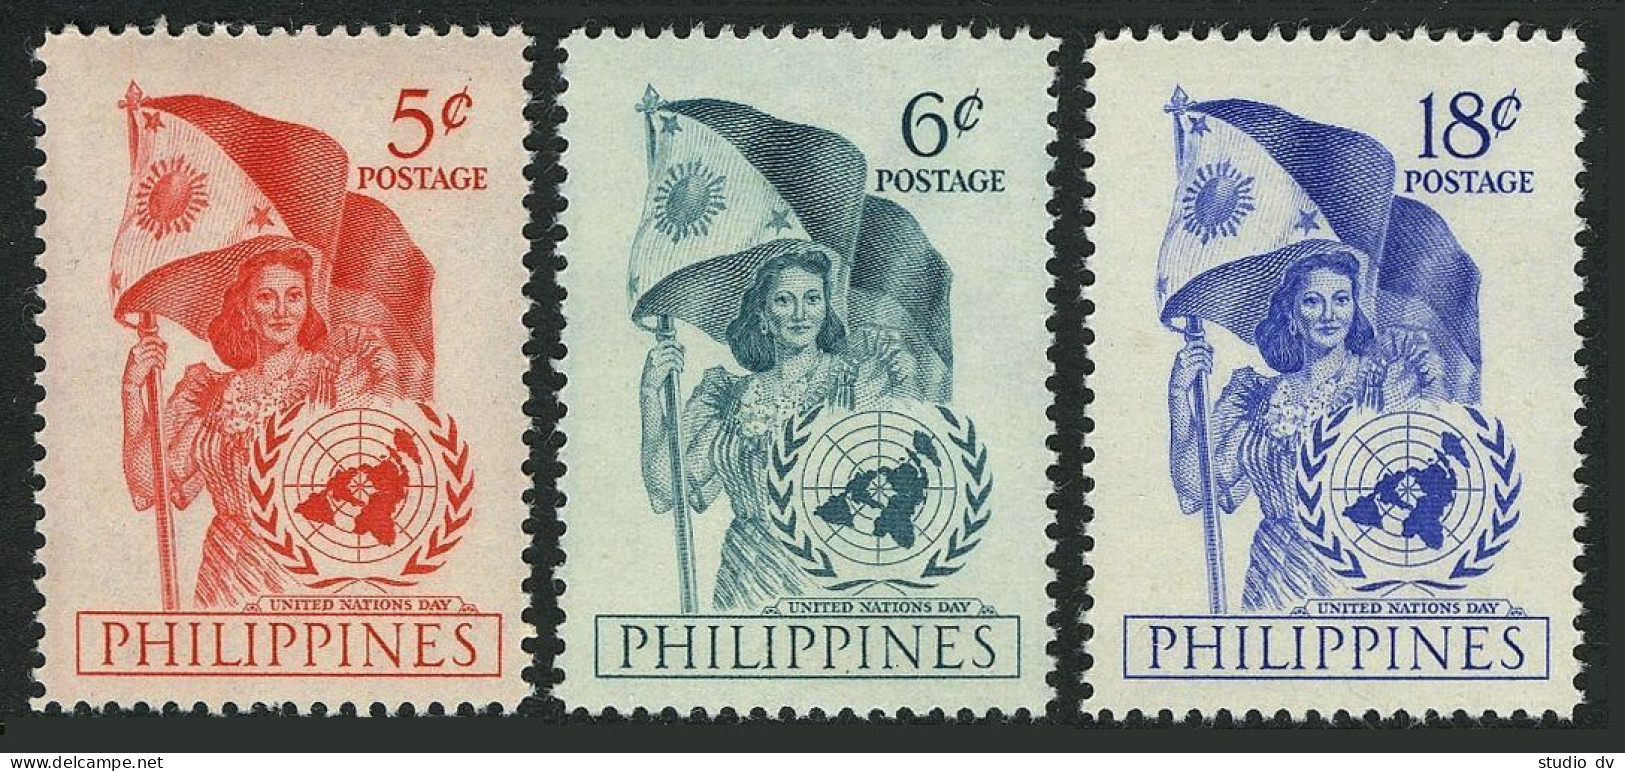 Philippines 569-571,hinged.Michel 540-542. United Nations Day 1951,Emblem,Flag. - Philippines